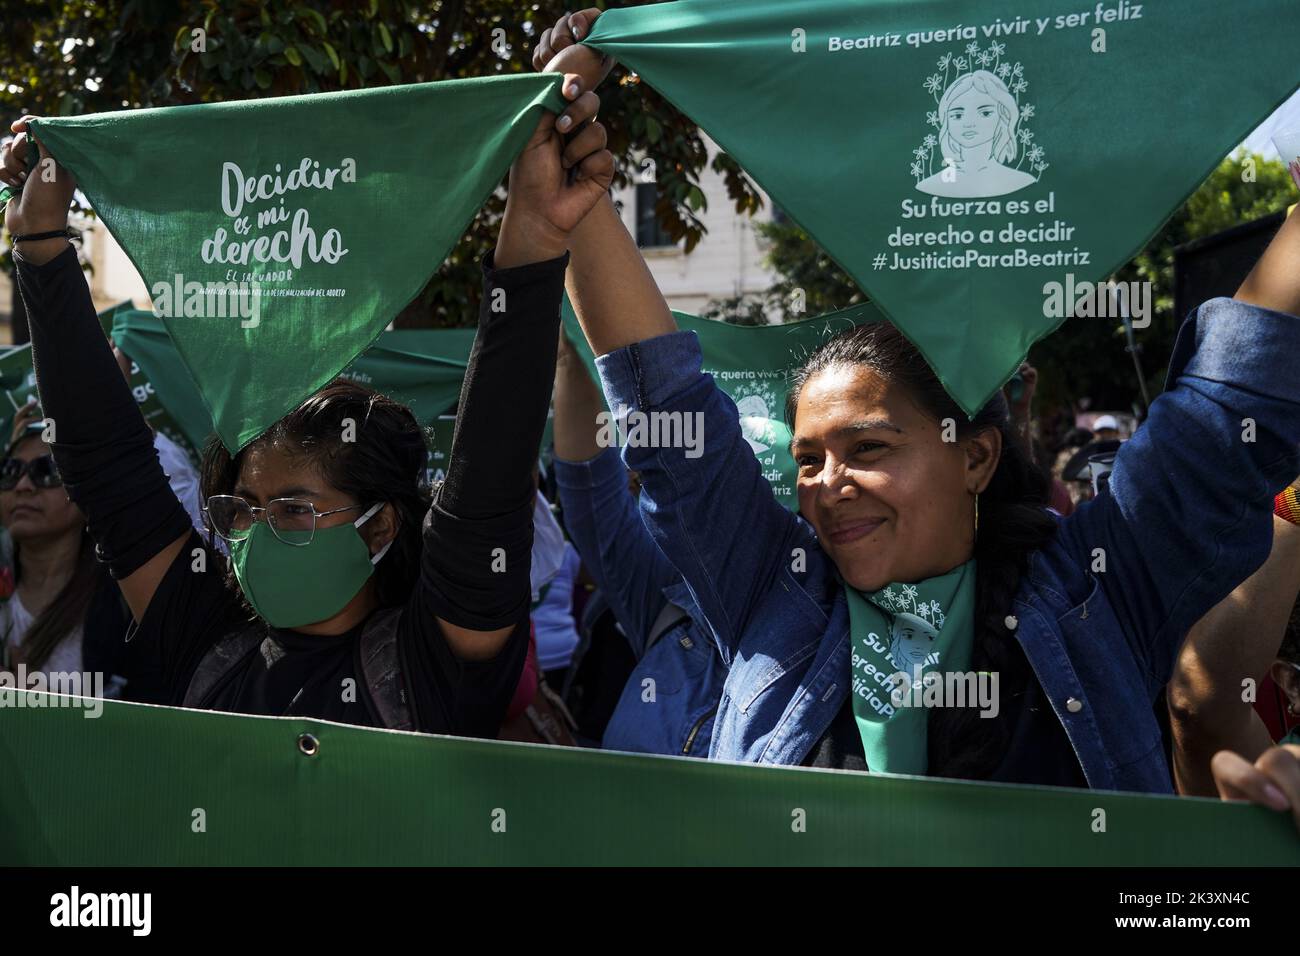 San Salvador, El Salvador. 28th Sep, 2022. Protesters chant slogans and hold up green scarves during a demonstration on the International Day of Action for the Right to Safe Abortion. On September 28, people around the world are protesting for the right to safe and legal access to abortion. Credit: Camilo Freedman/dpa/Alamy Live News Stock Photo